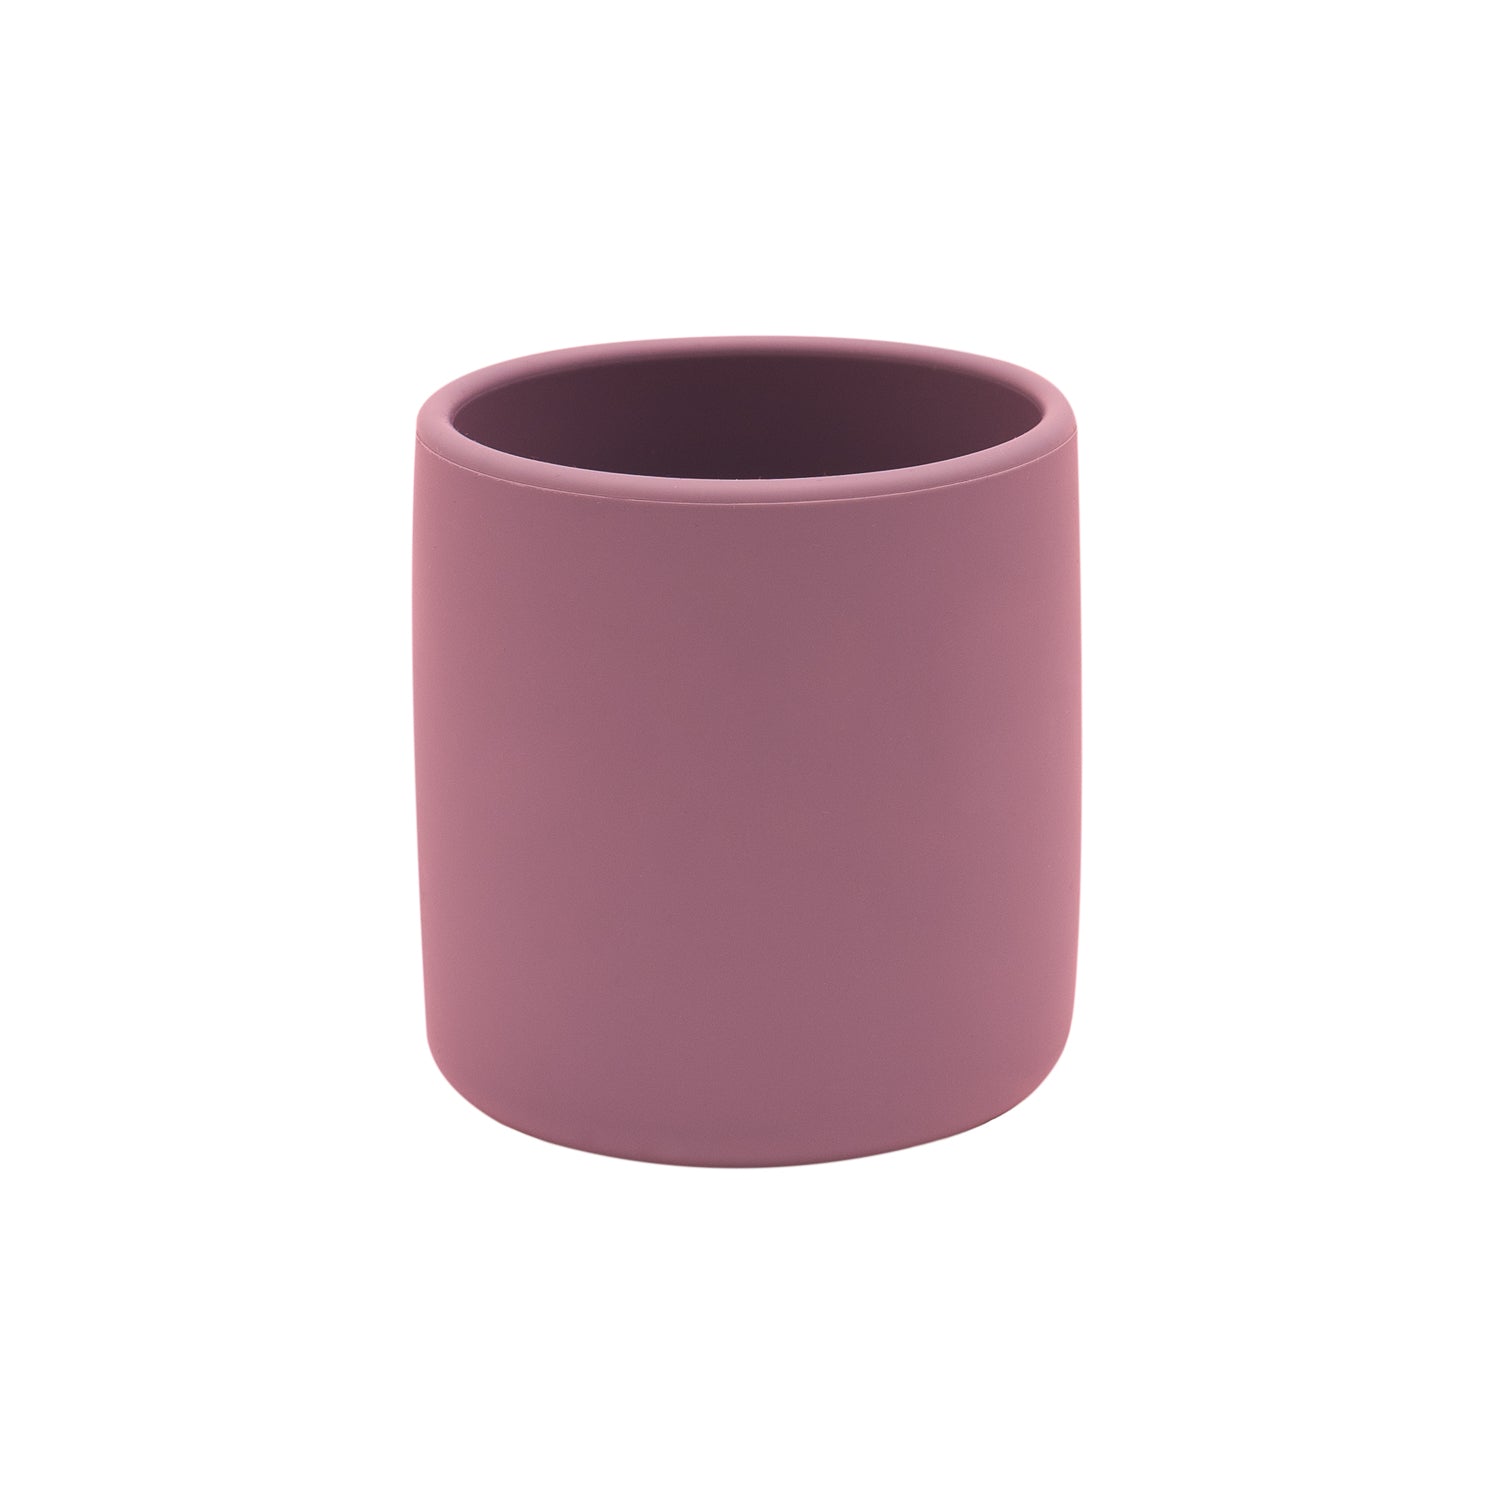 Silicone Grip Cup in Dusty Rose